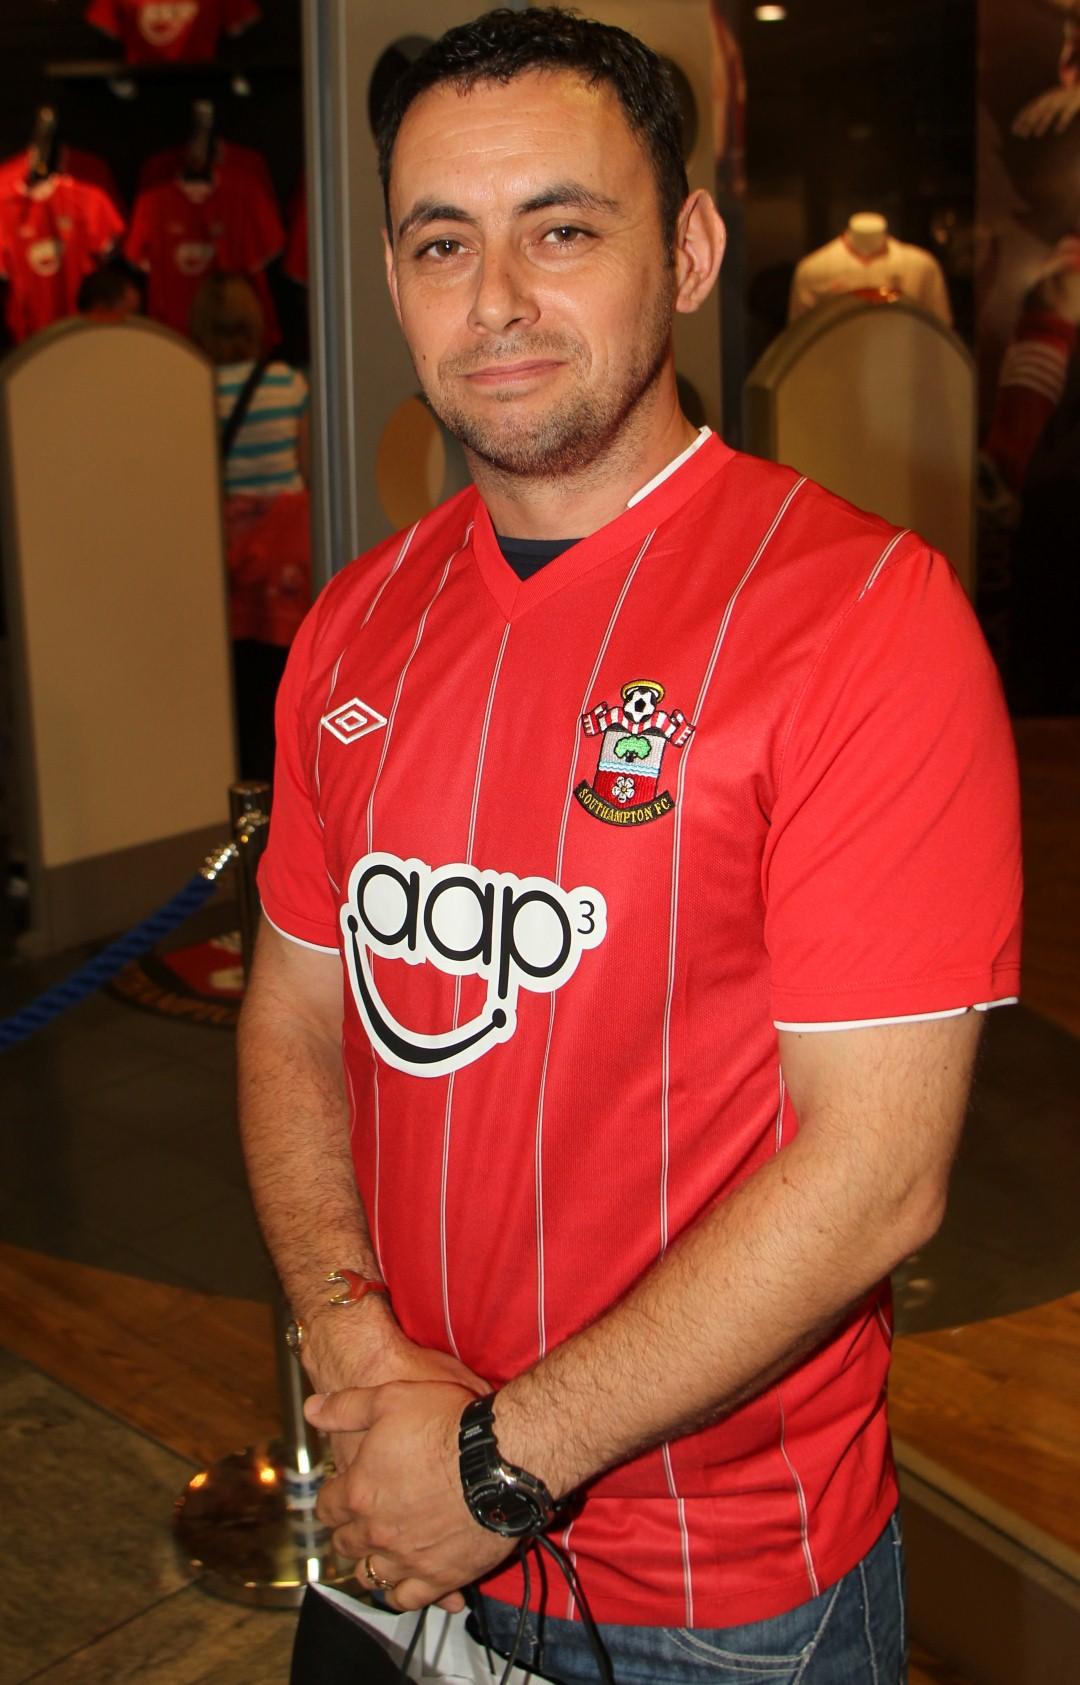 Weekend in Pictures June 30 - July 01. New Saints Kit.